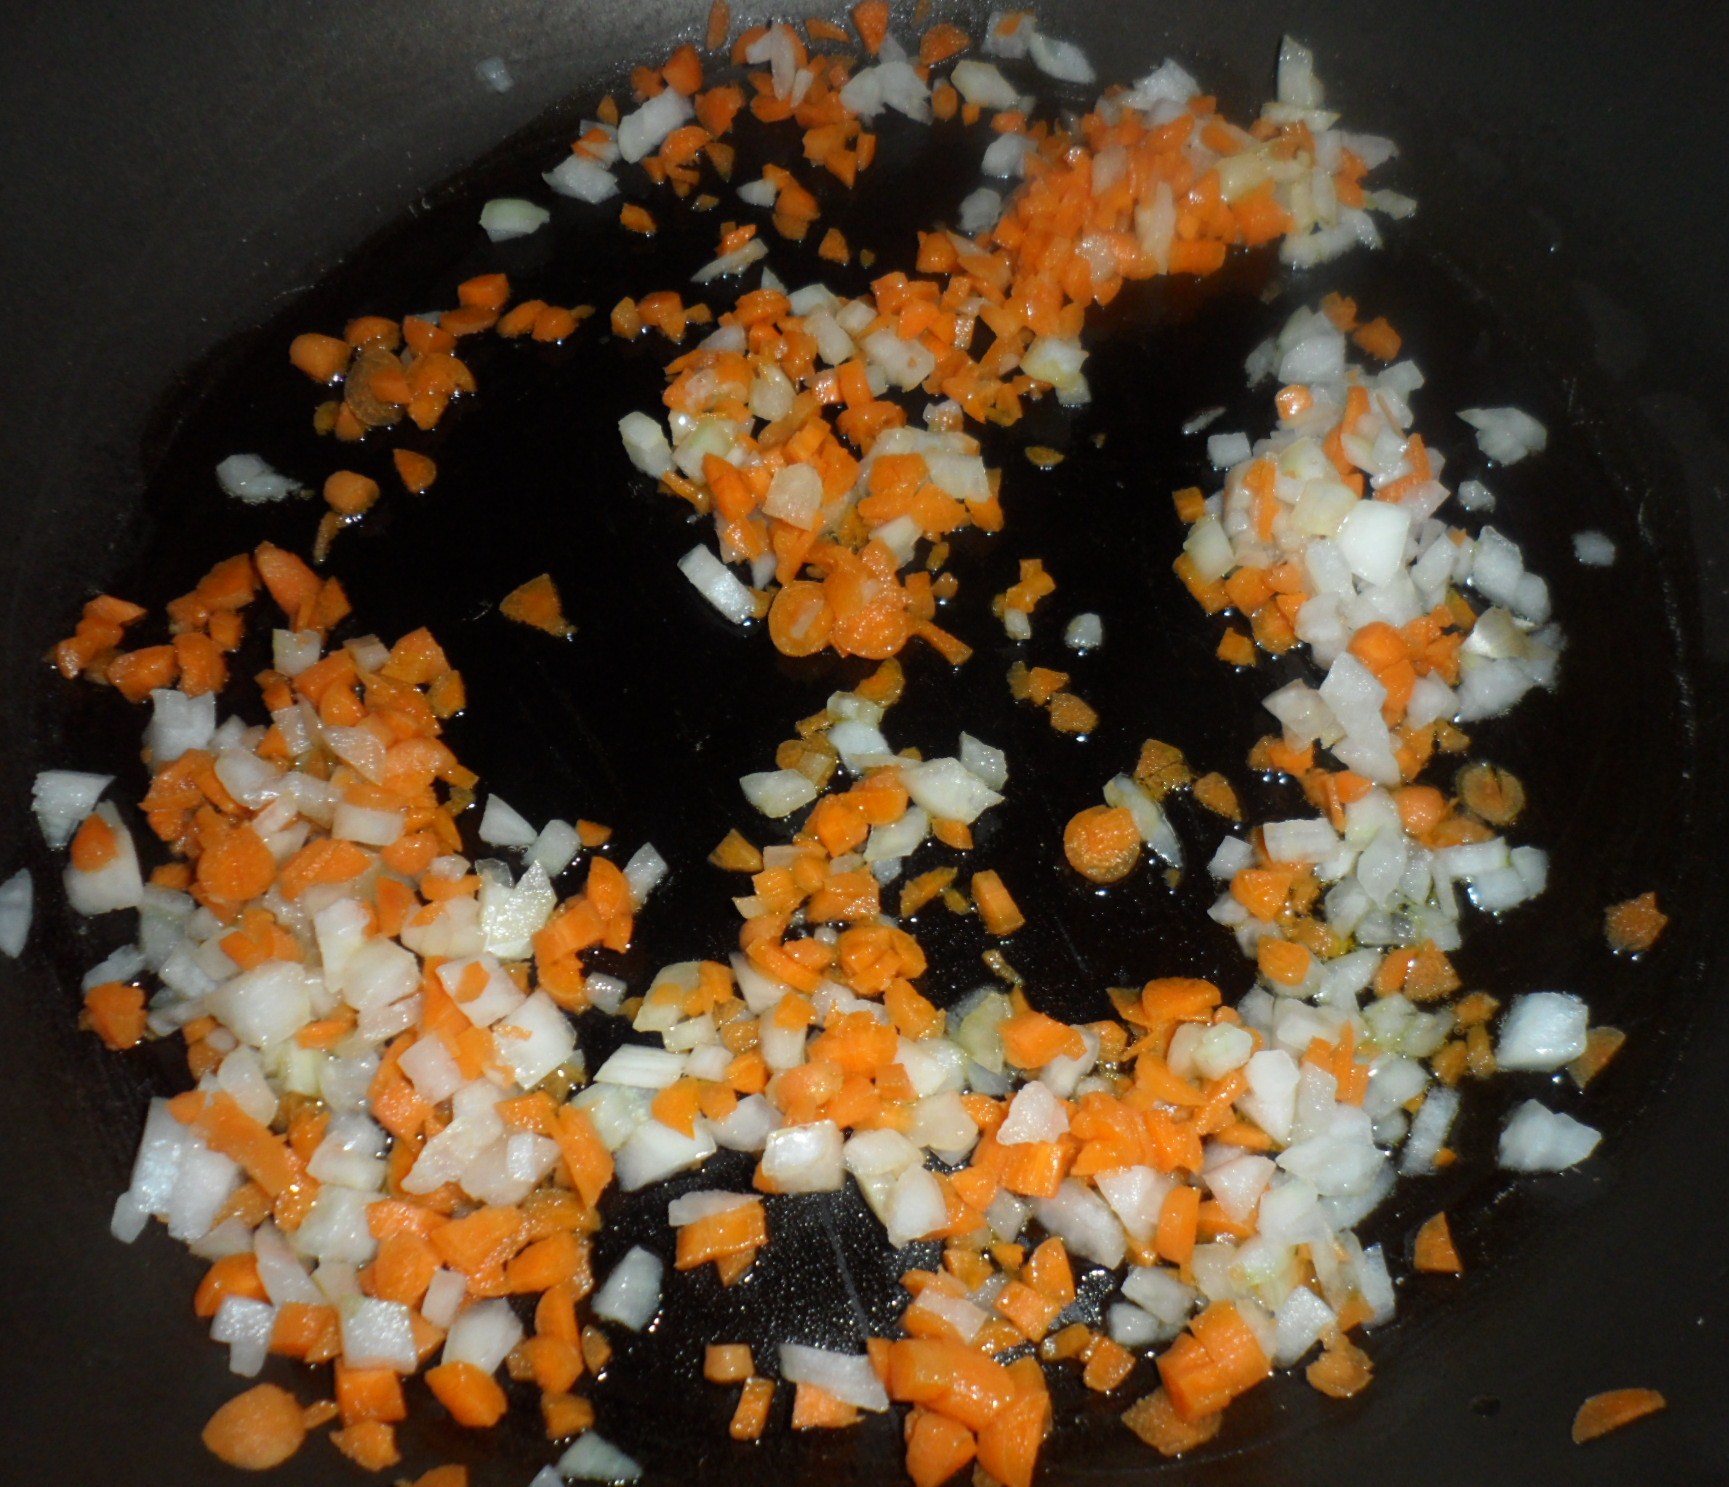 You start off by cooking some diced carrots and onions in olive oil.  Then you add in some minced garlic and then your ground turkey or beef.